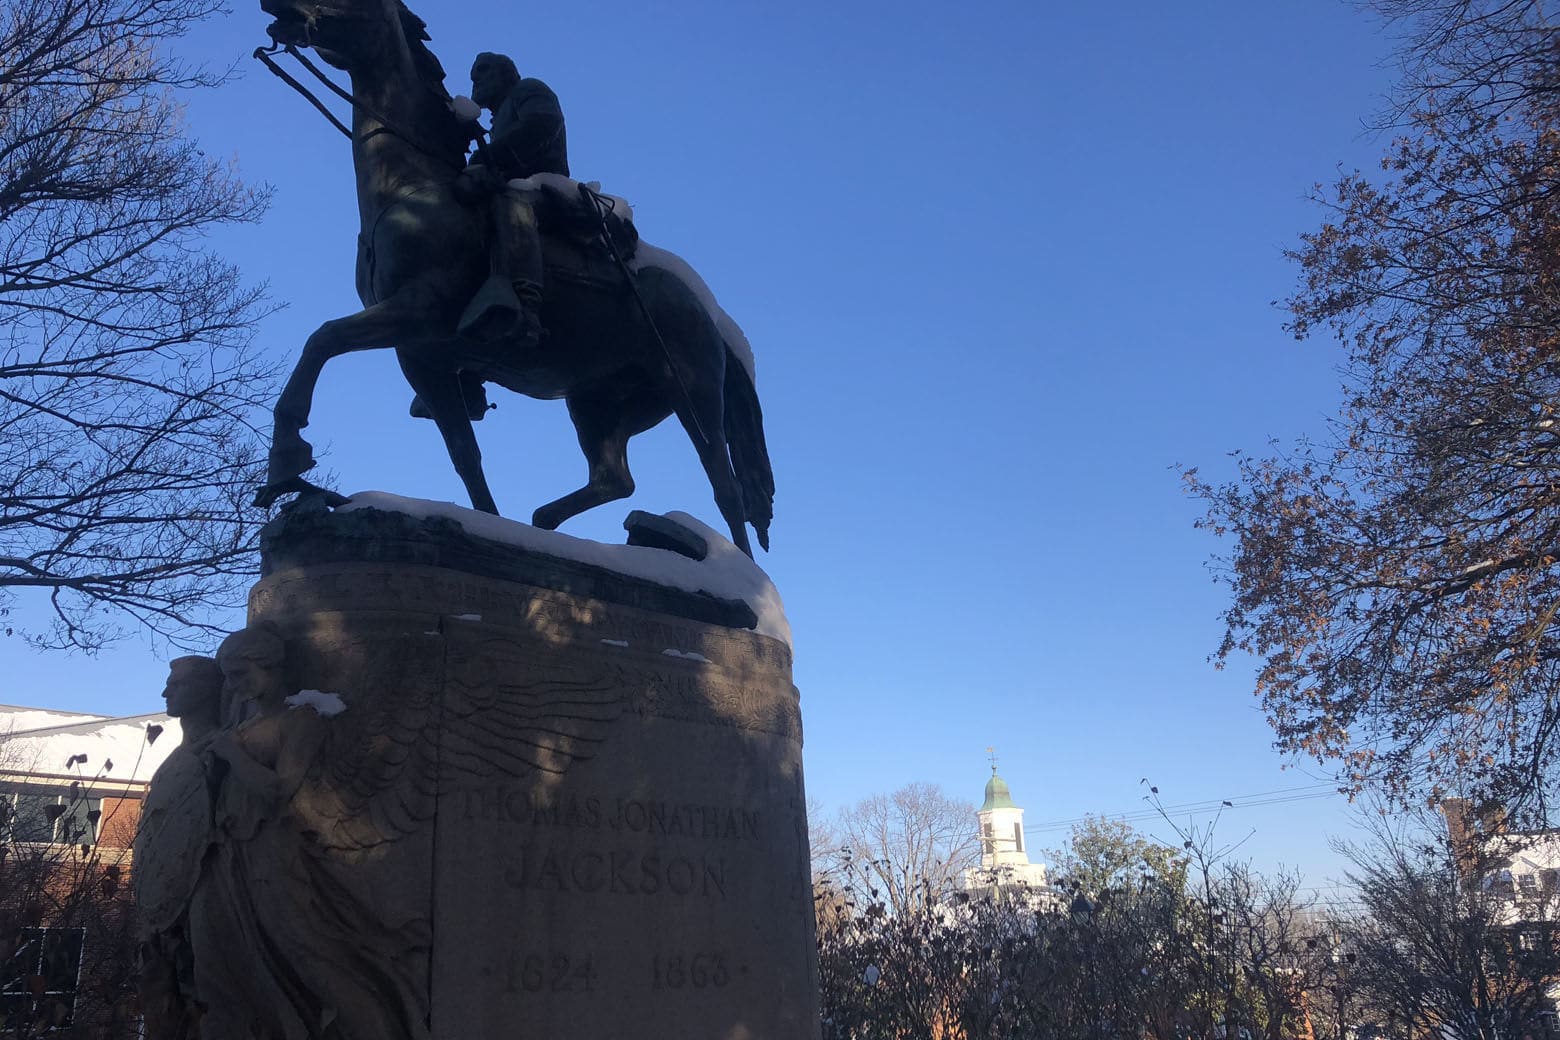 The statue of Stonewall Jackson in Charlottesville is seen Dec. 11, 2018. The white belltower of Charlottesville Circuit Court, where a jury is deliberating the sentence of James Alex Fields Jr., is seen in the background. (WTOP/Max Smith)